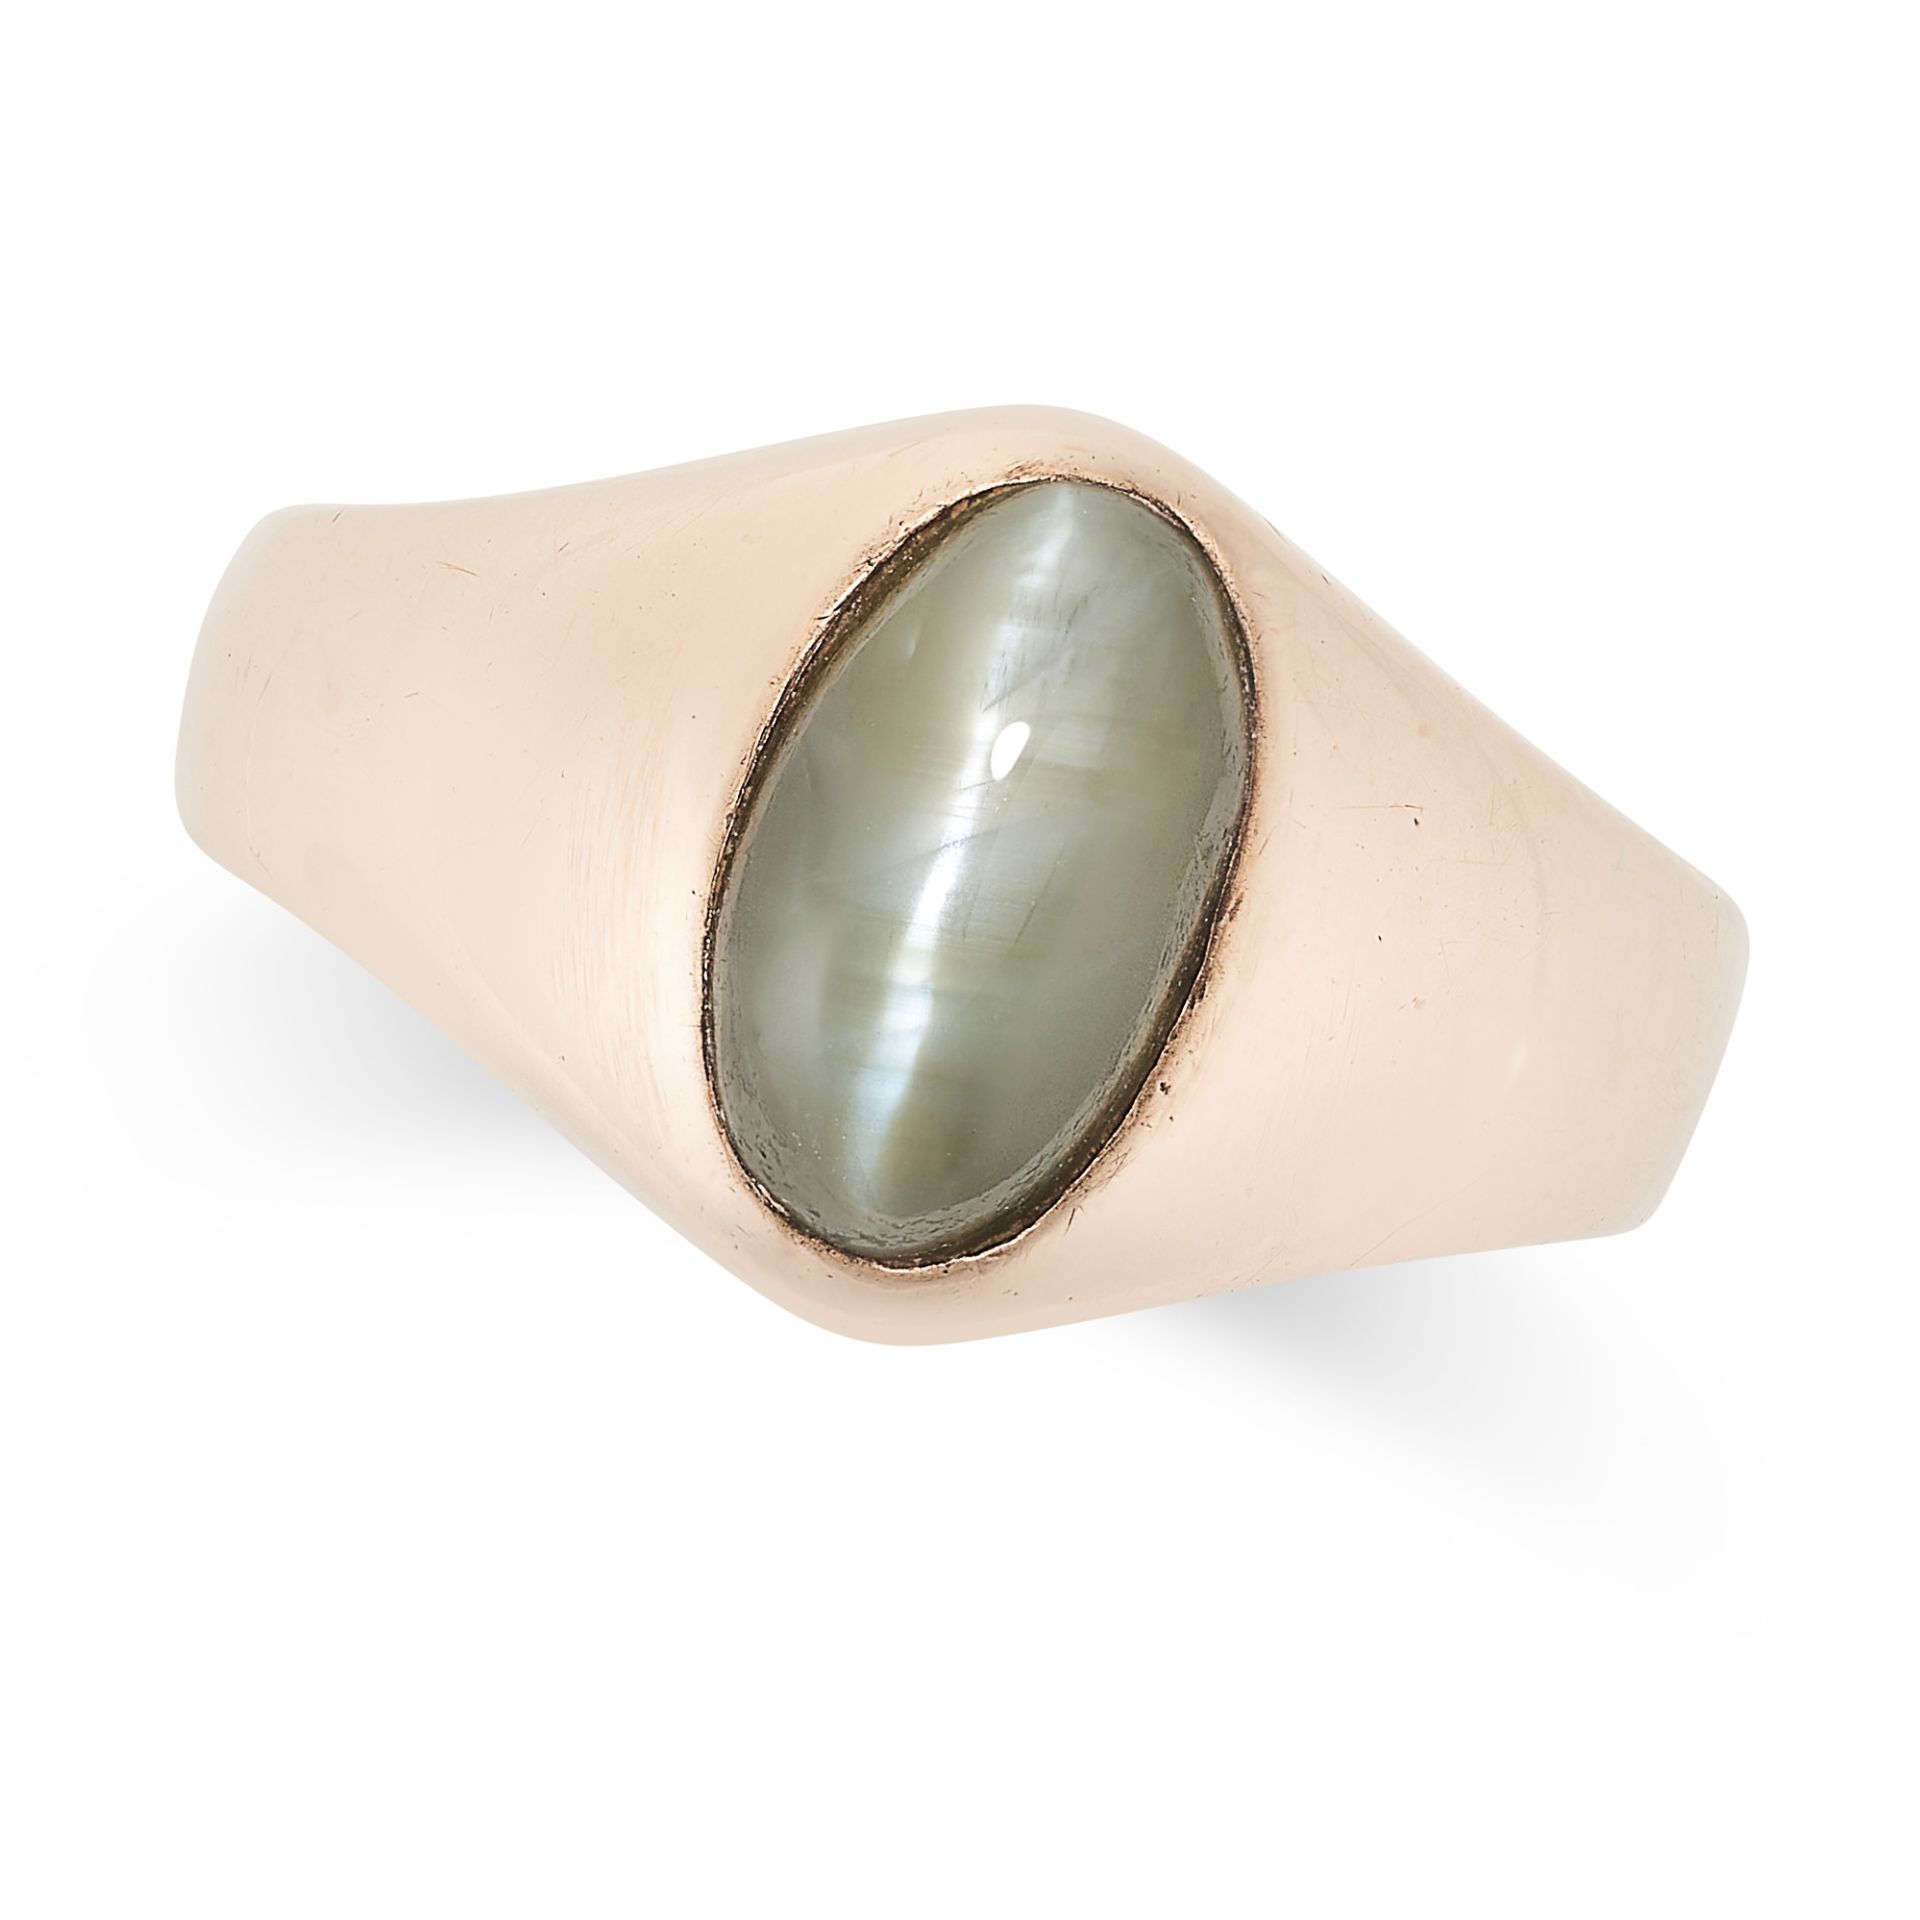 AN ANTIQUE CAT'S EYE GYPSY RING in gold, set with an oval cabochon cat's eye chrysoberyl of